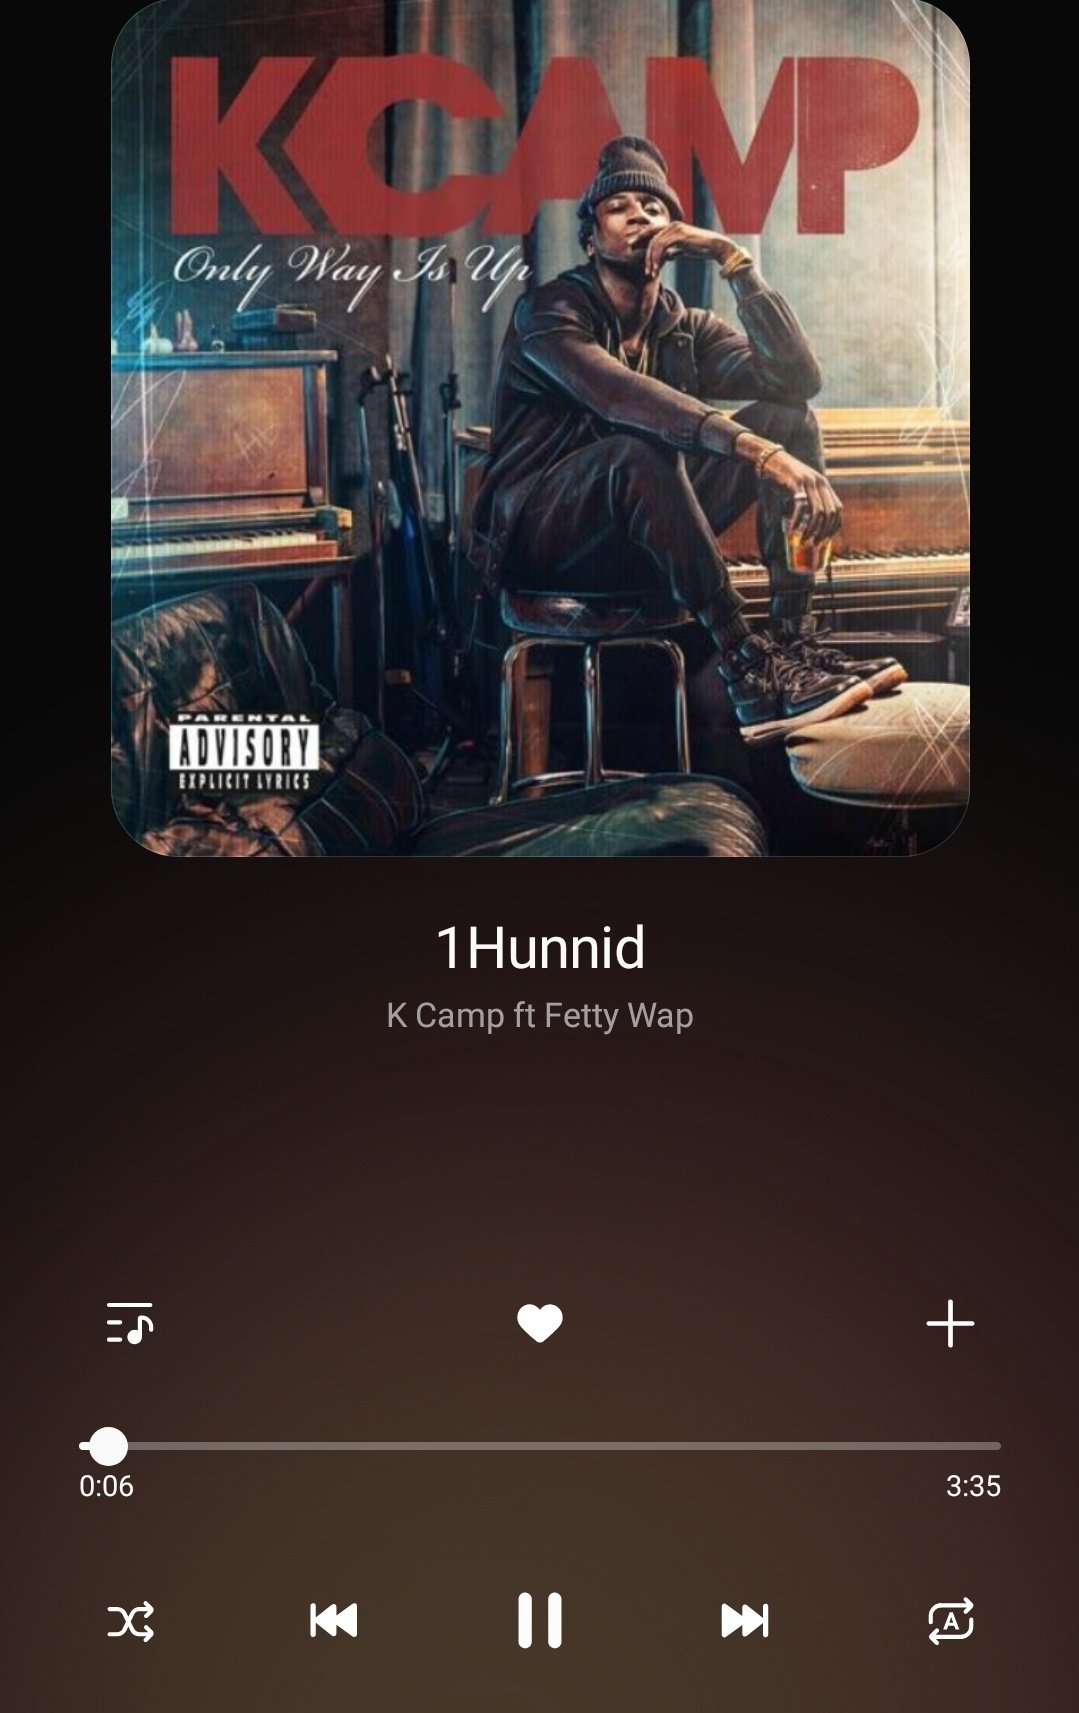 In honor of K Camp Birthday, here are some of my favorite songs from him   Happy Birthday 